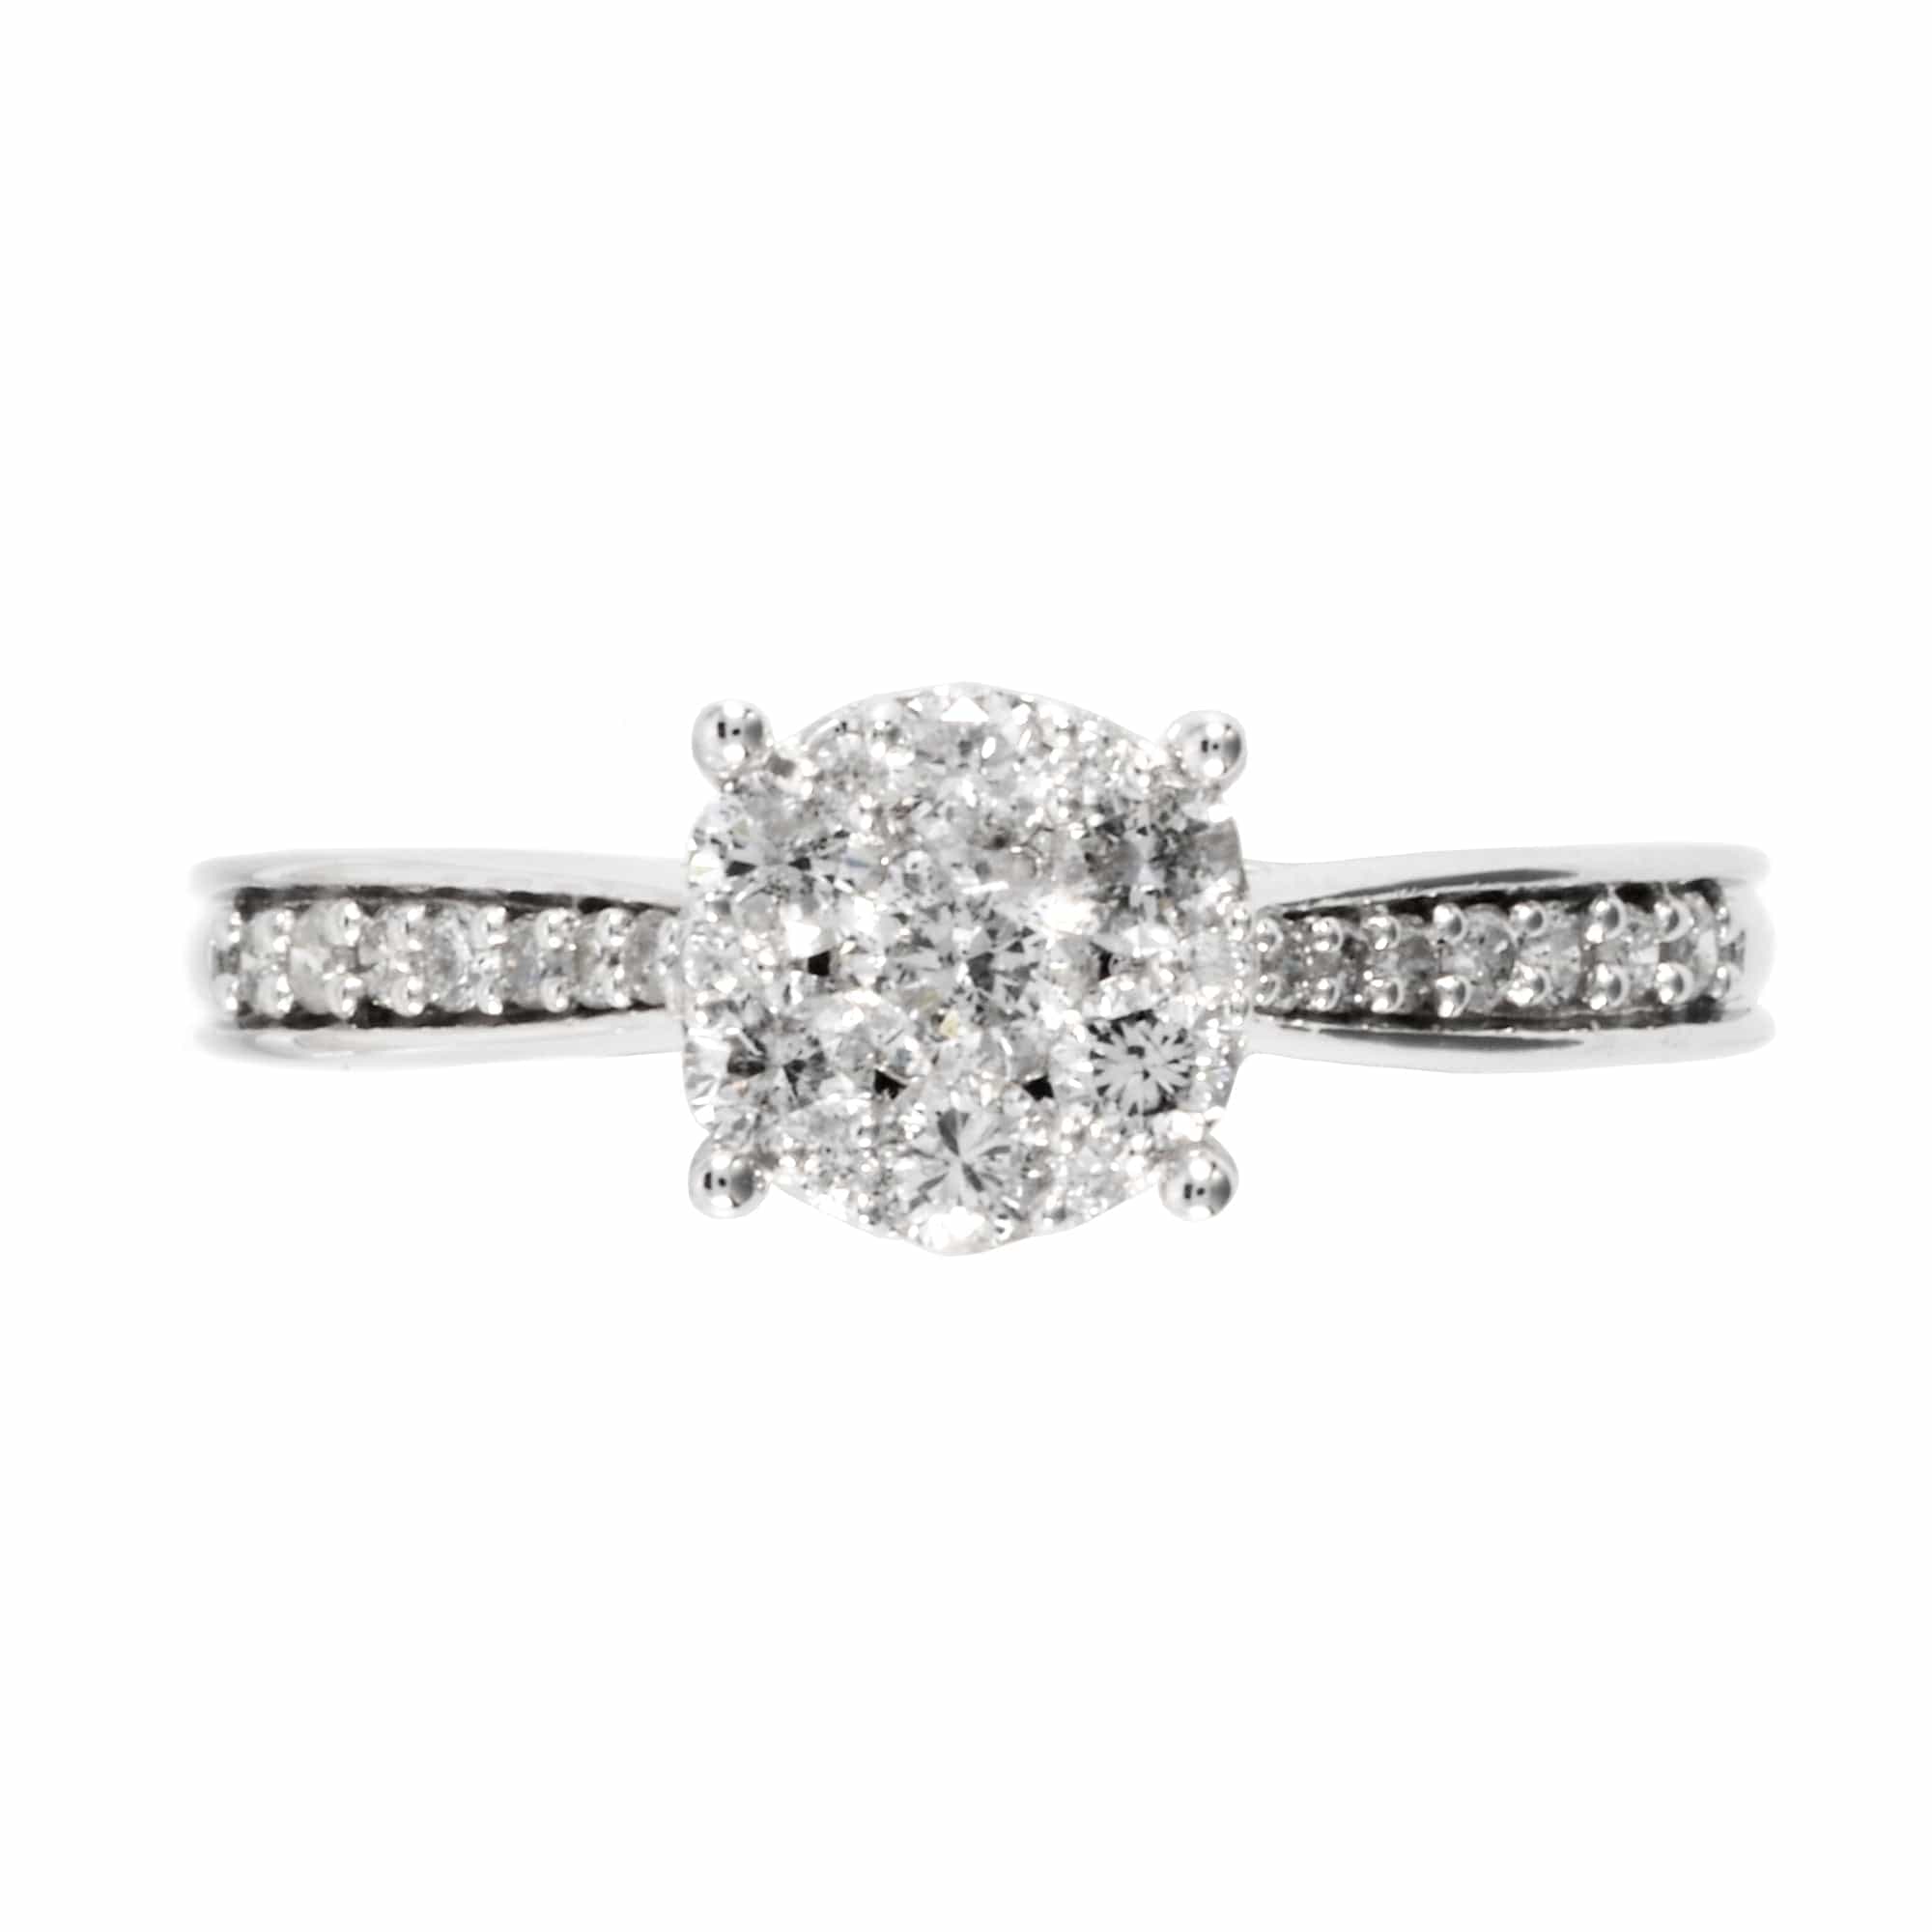 RG034347 Classic Round Diamond Solitaire Ring in 18ct White Gold 2